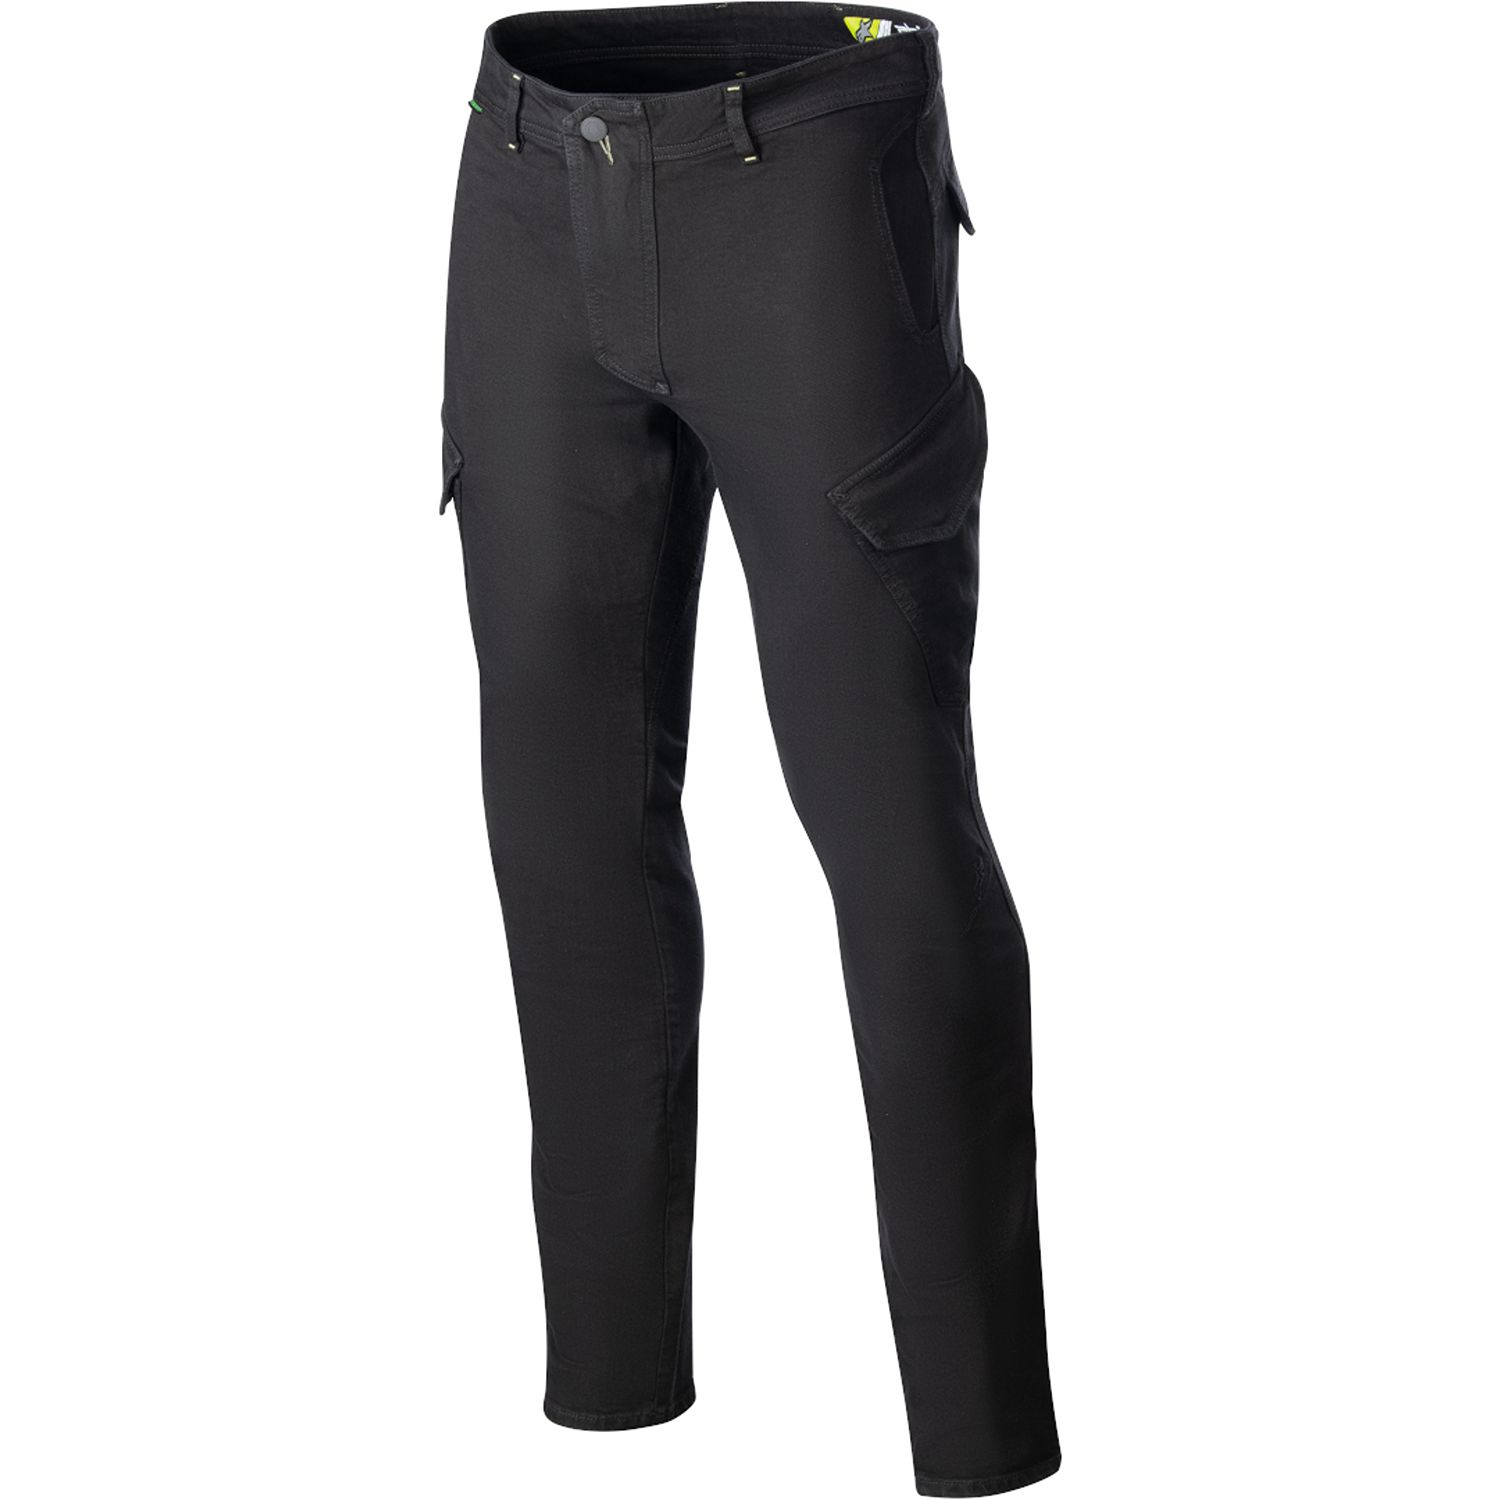 Image of Alpinestars Caliber Slim Fit Tech Riding Pants Anthracite Taille 31